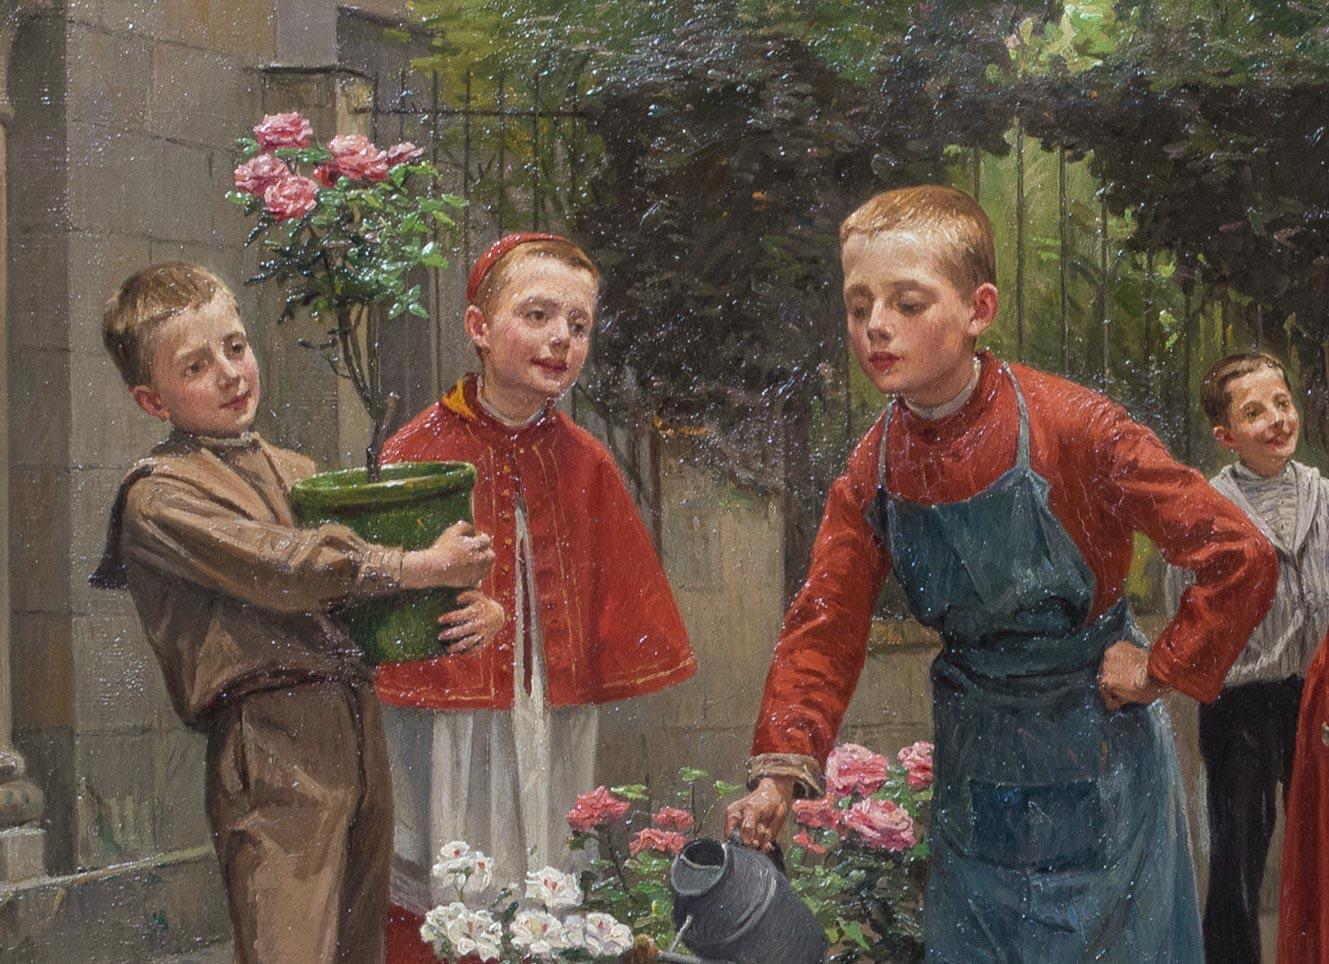 The Young Gardeners, 19th Century

by Charles Bertrand d'Entraygues (French, 1850-1929)

Large 19th Century French Monastery scene of young male gardeners, oil on canvas by Charles Bertrand d'Entraygues. Excellent quality and condition example of